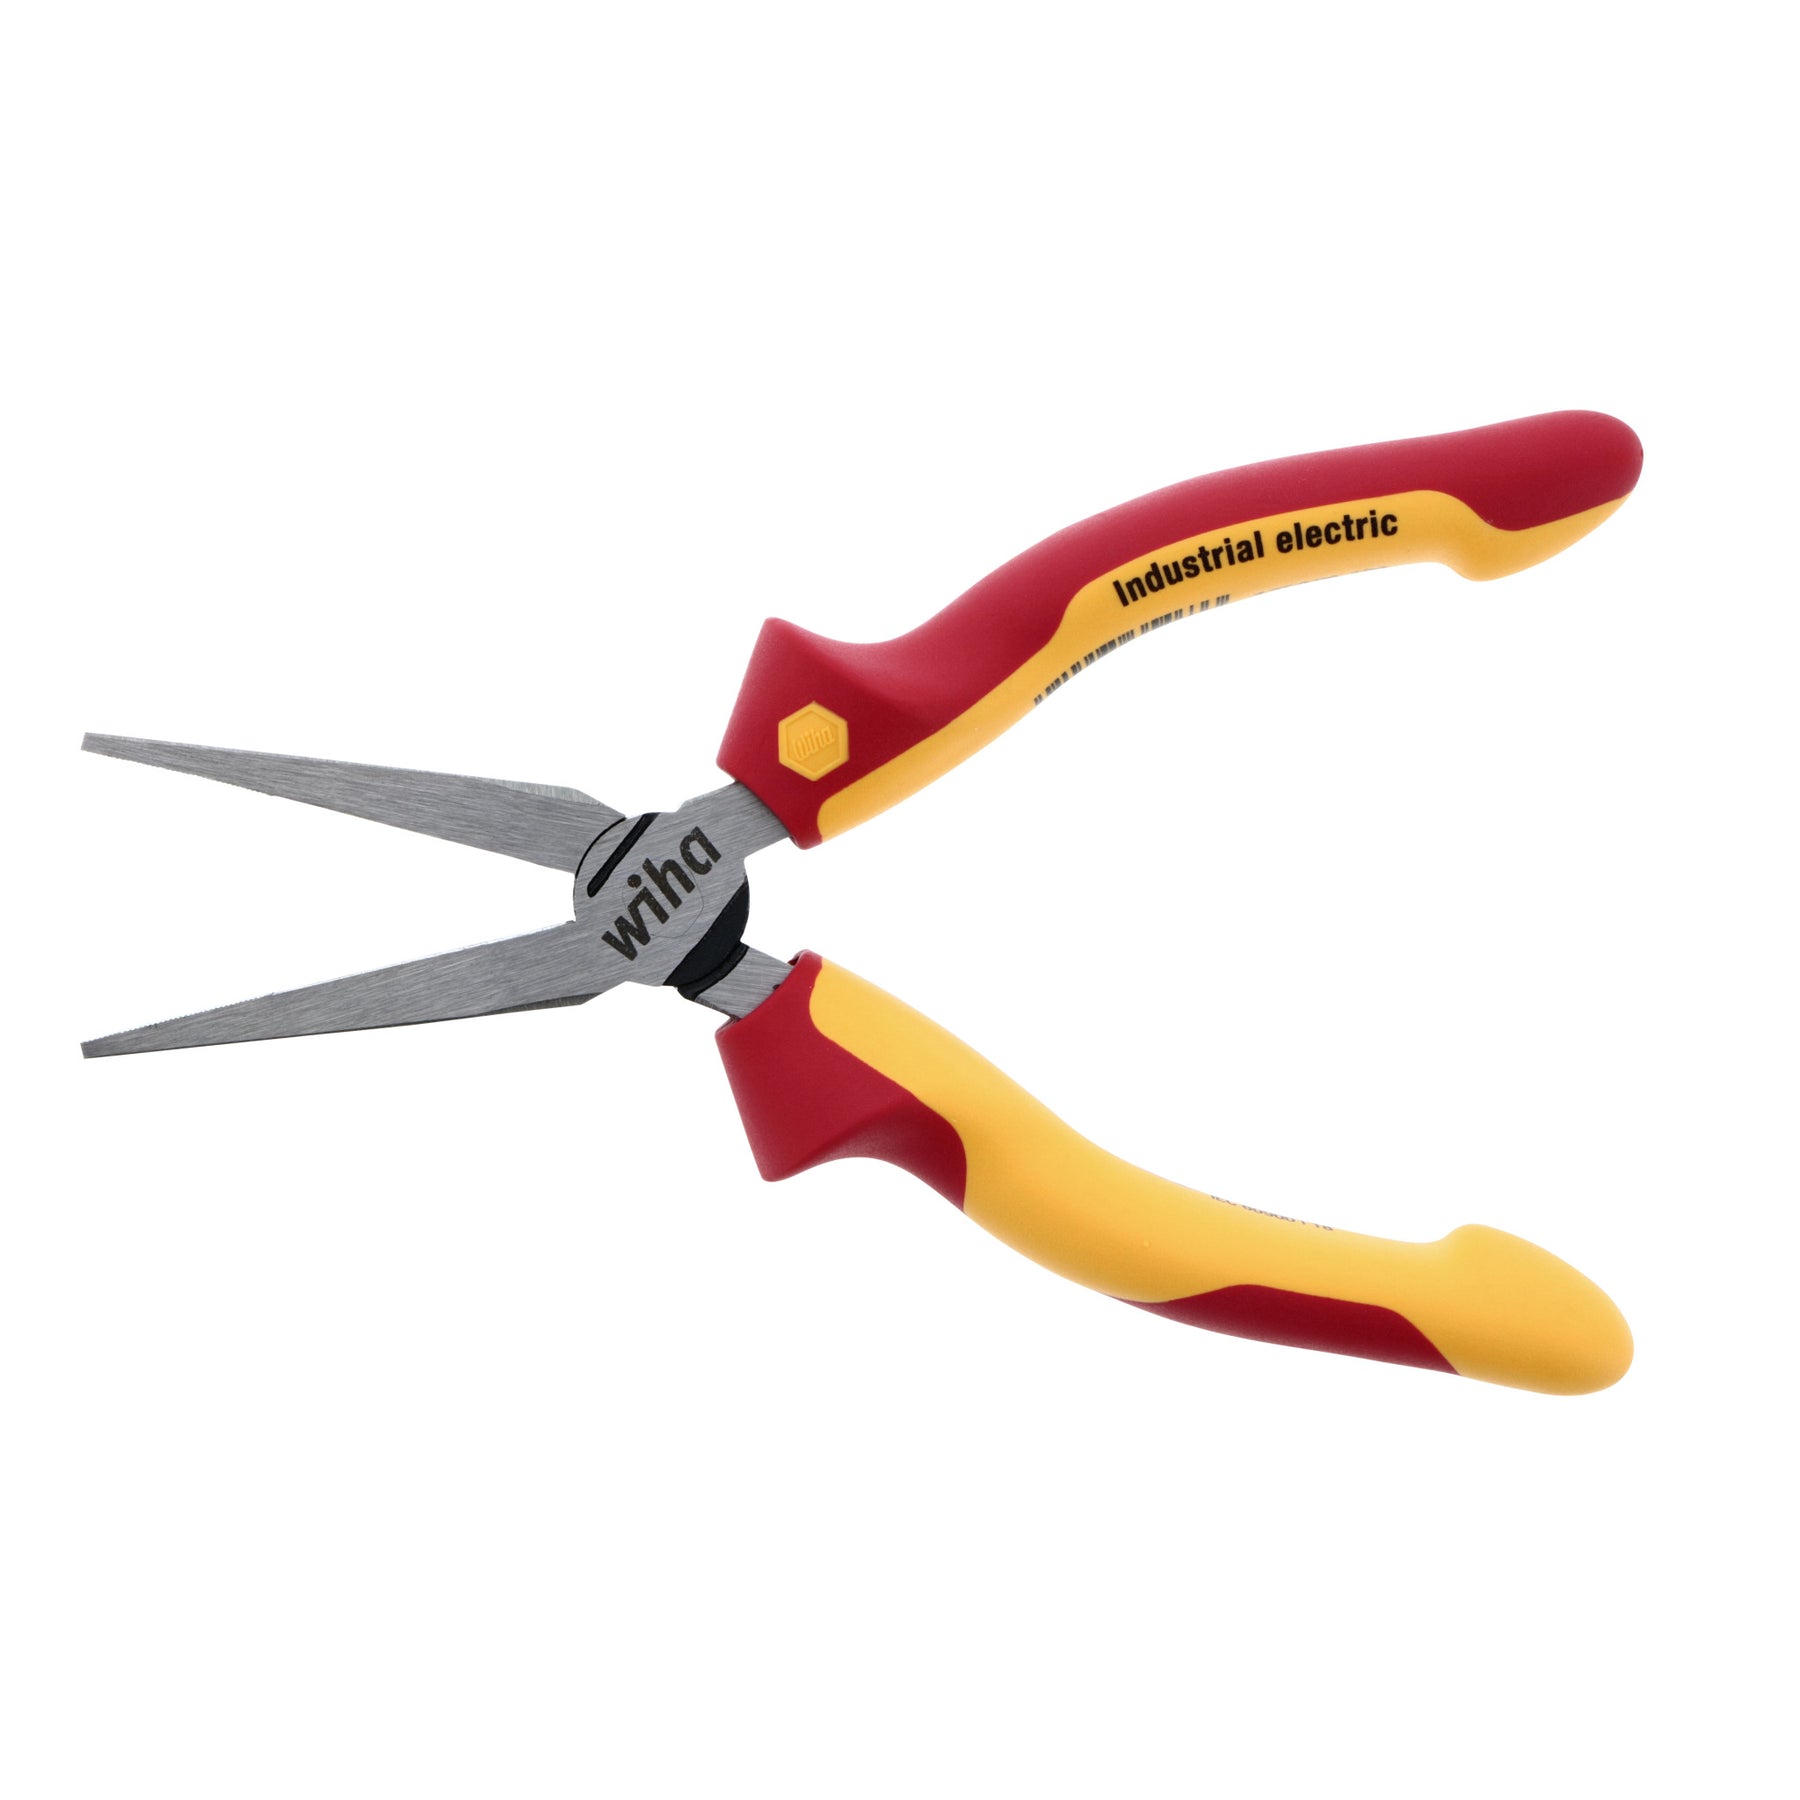 Wiha 32941 Insulated 6 inch Long Flat Nose Pliers